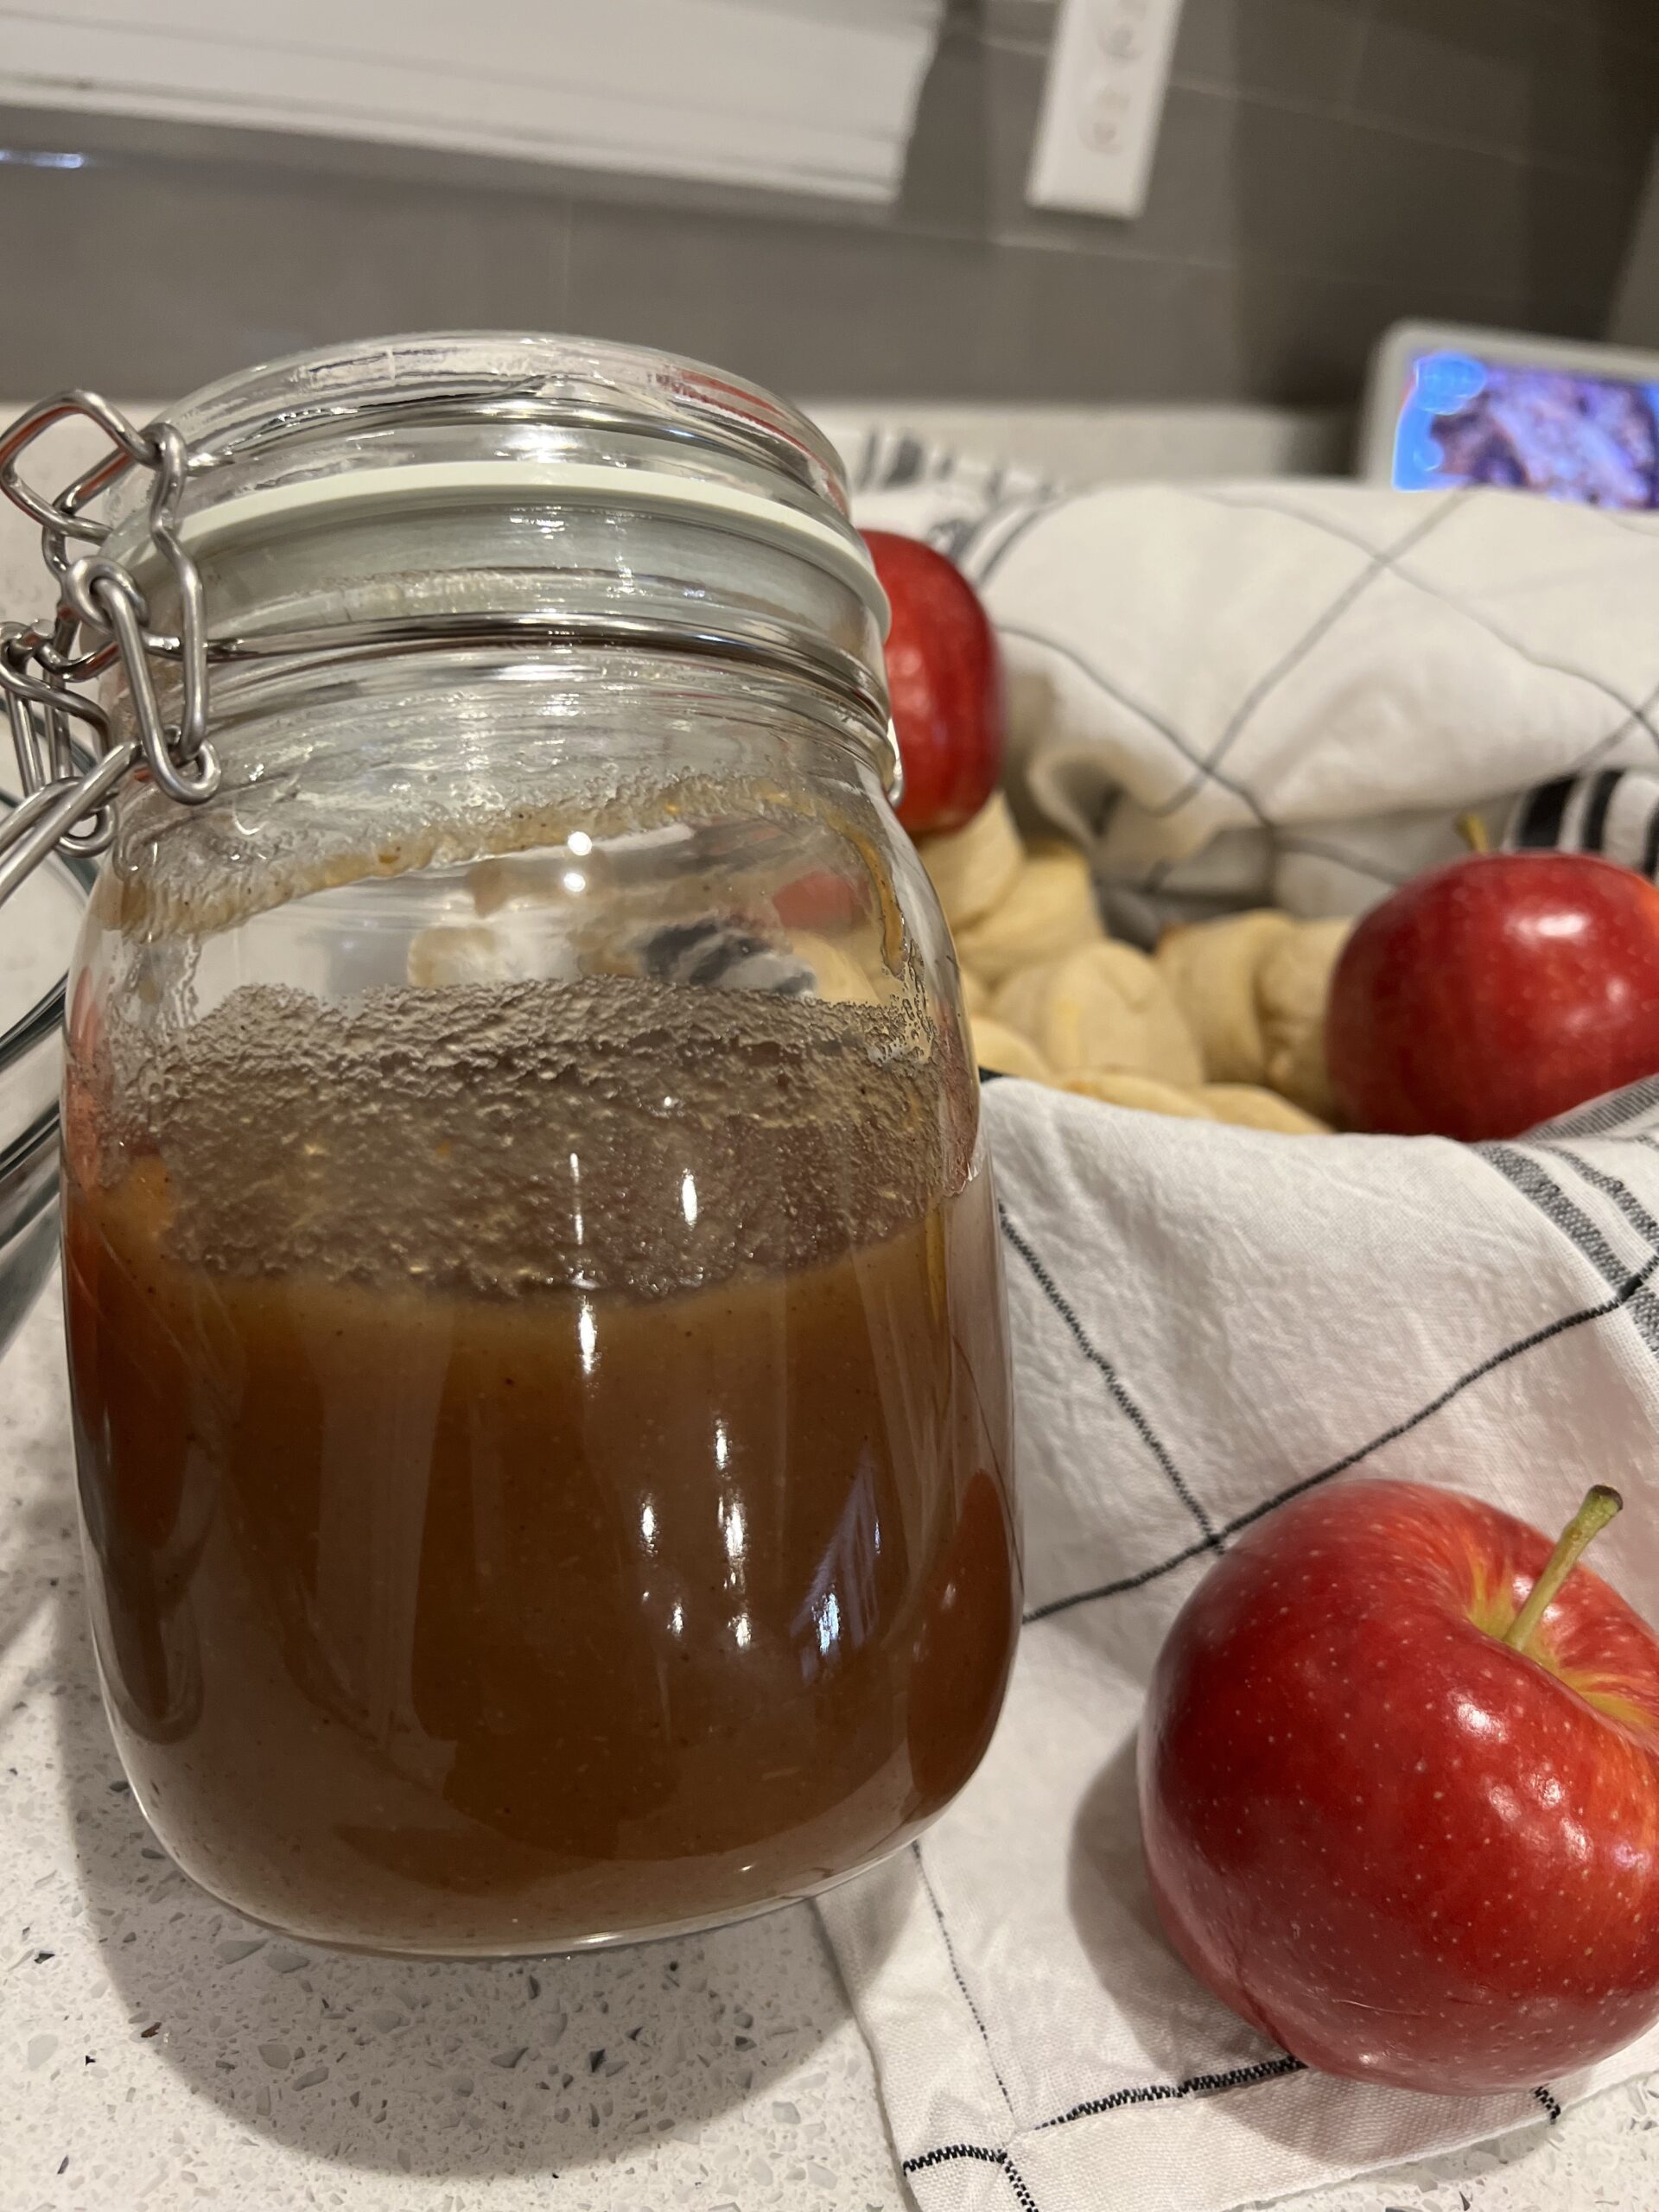 Apple butter inside of a glass mason jar sitting next to a basket of apples and fresh cooked biscuits. The basket is lined with a white and black plaid towel.